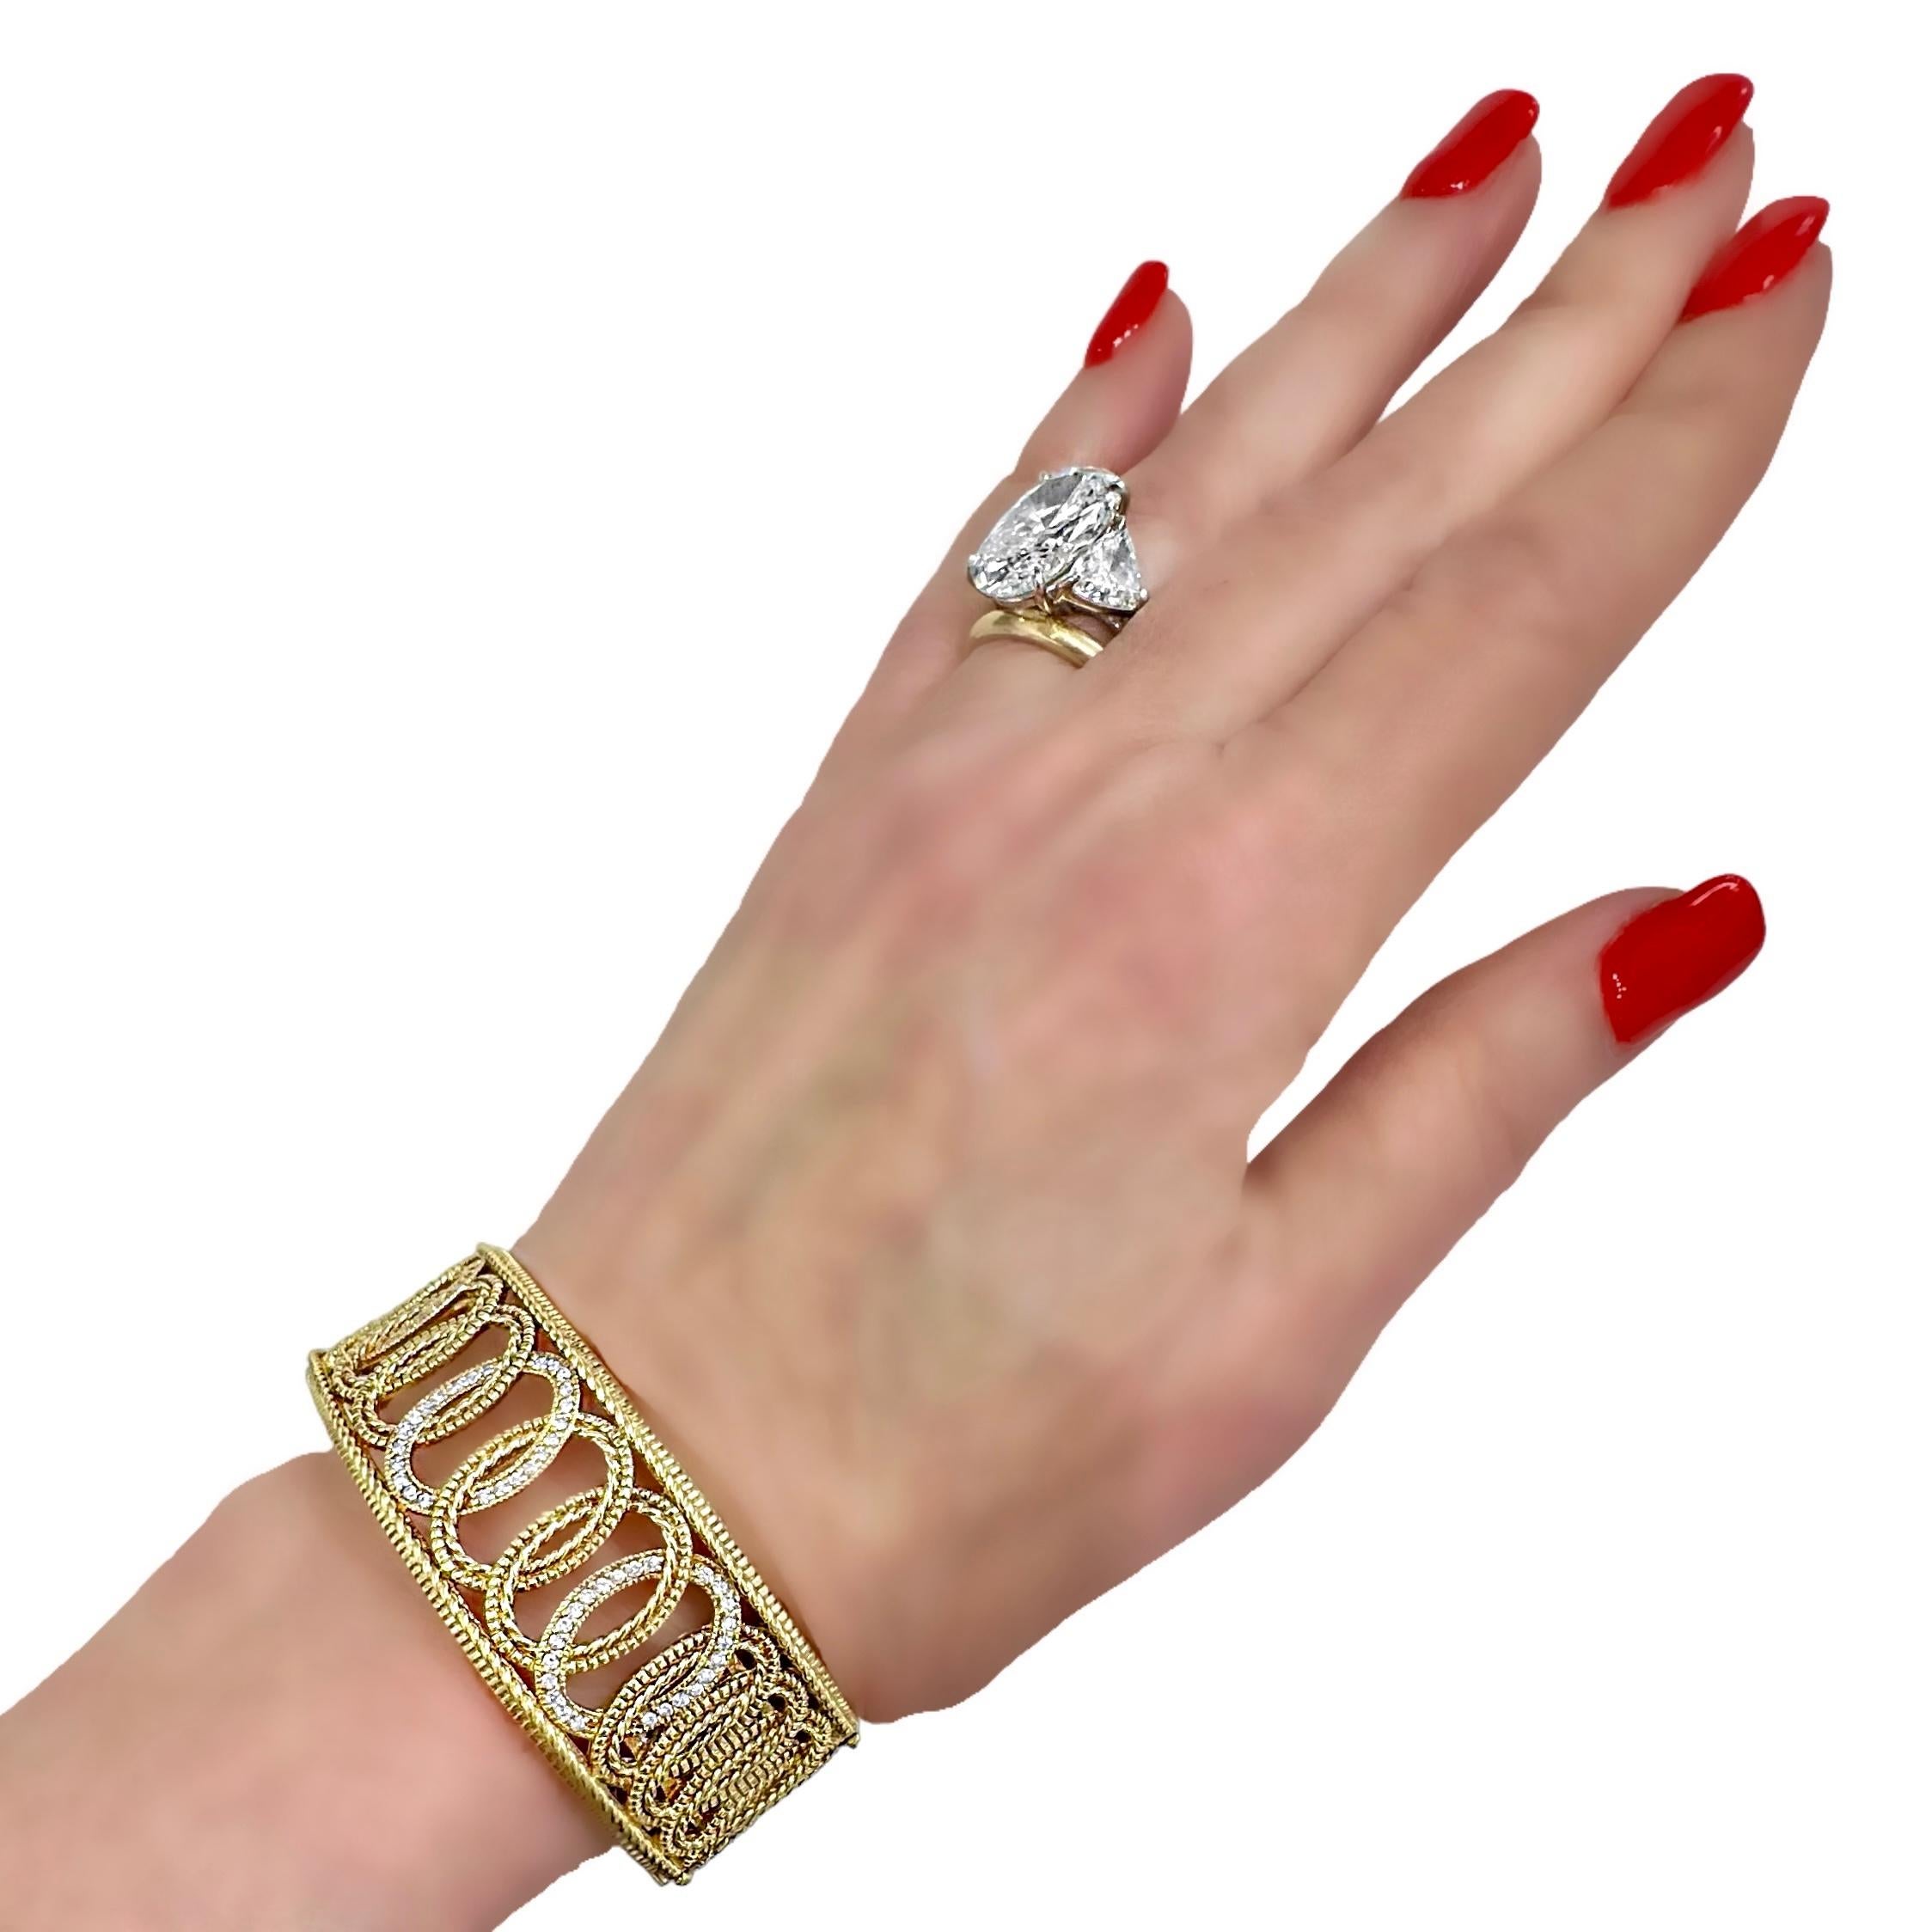 Casual Judith Ripka 18k Gold Hinged, Cuff Bracelet with Diamonds 7/8 inch Wide  8